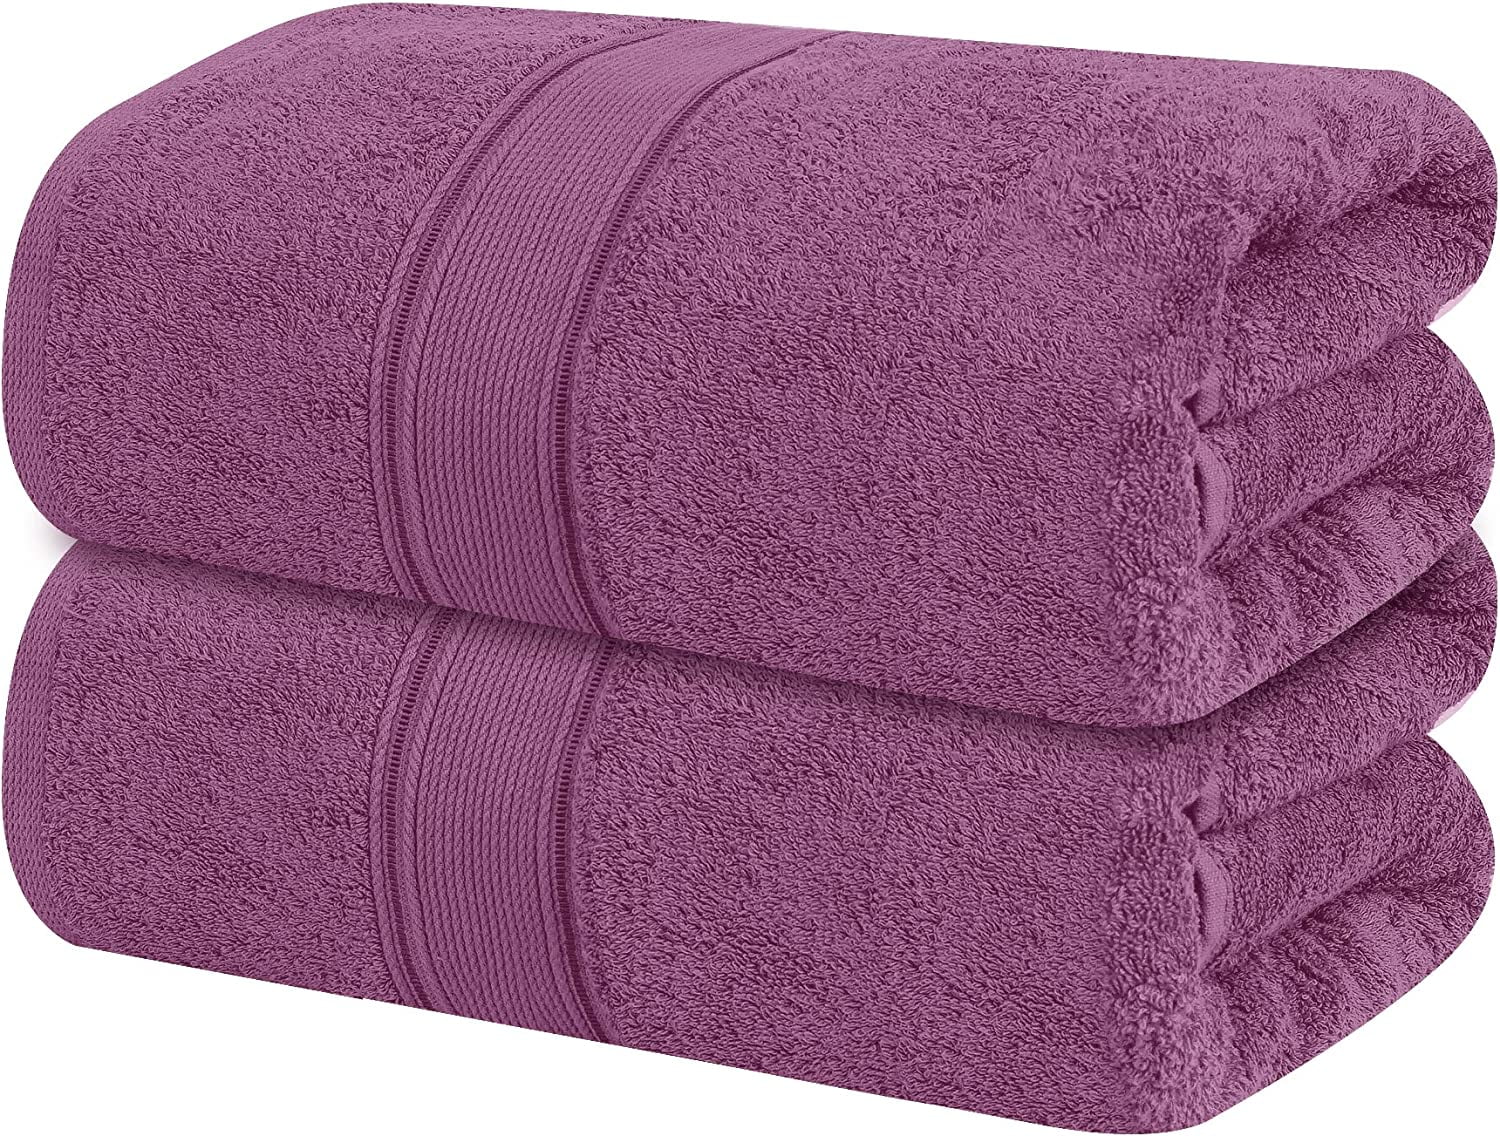 Tens Towels Large Bath Towels Review - Is It Worth It? 